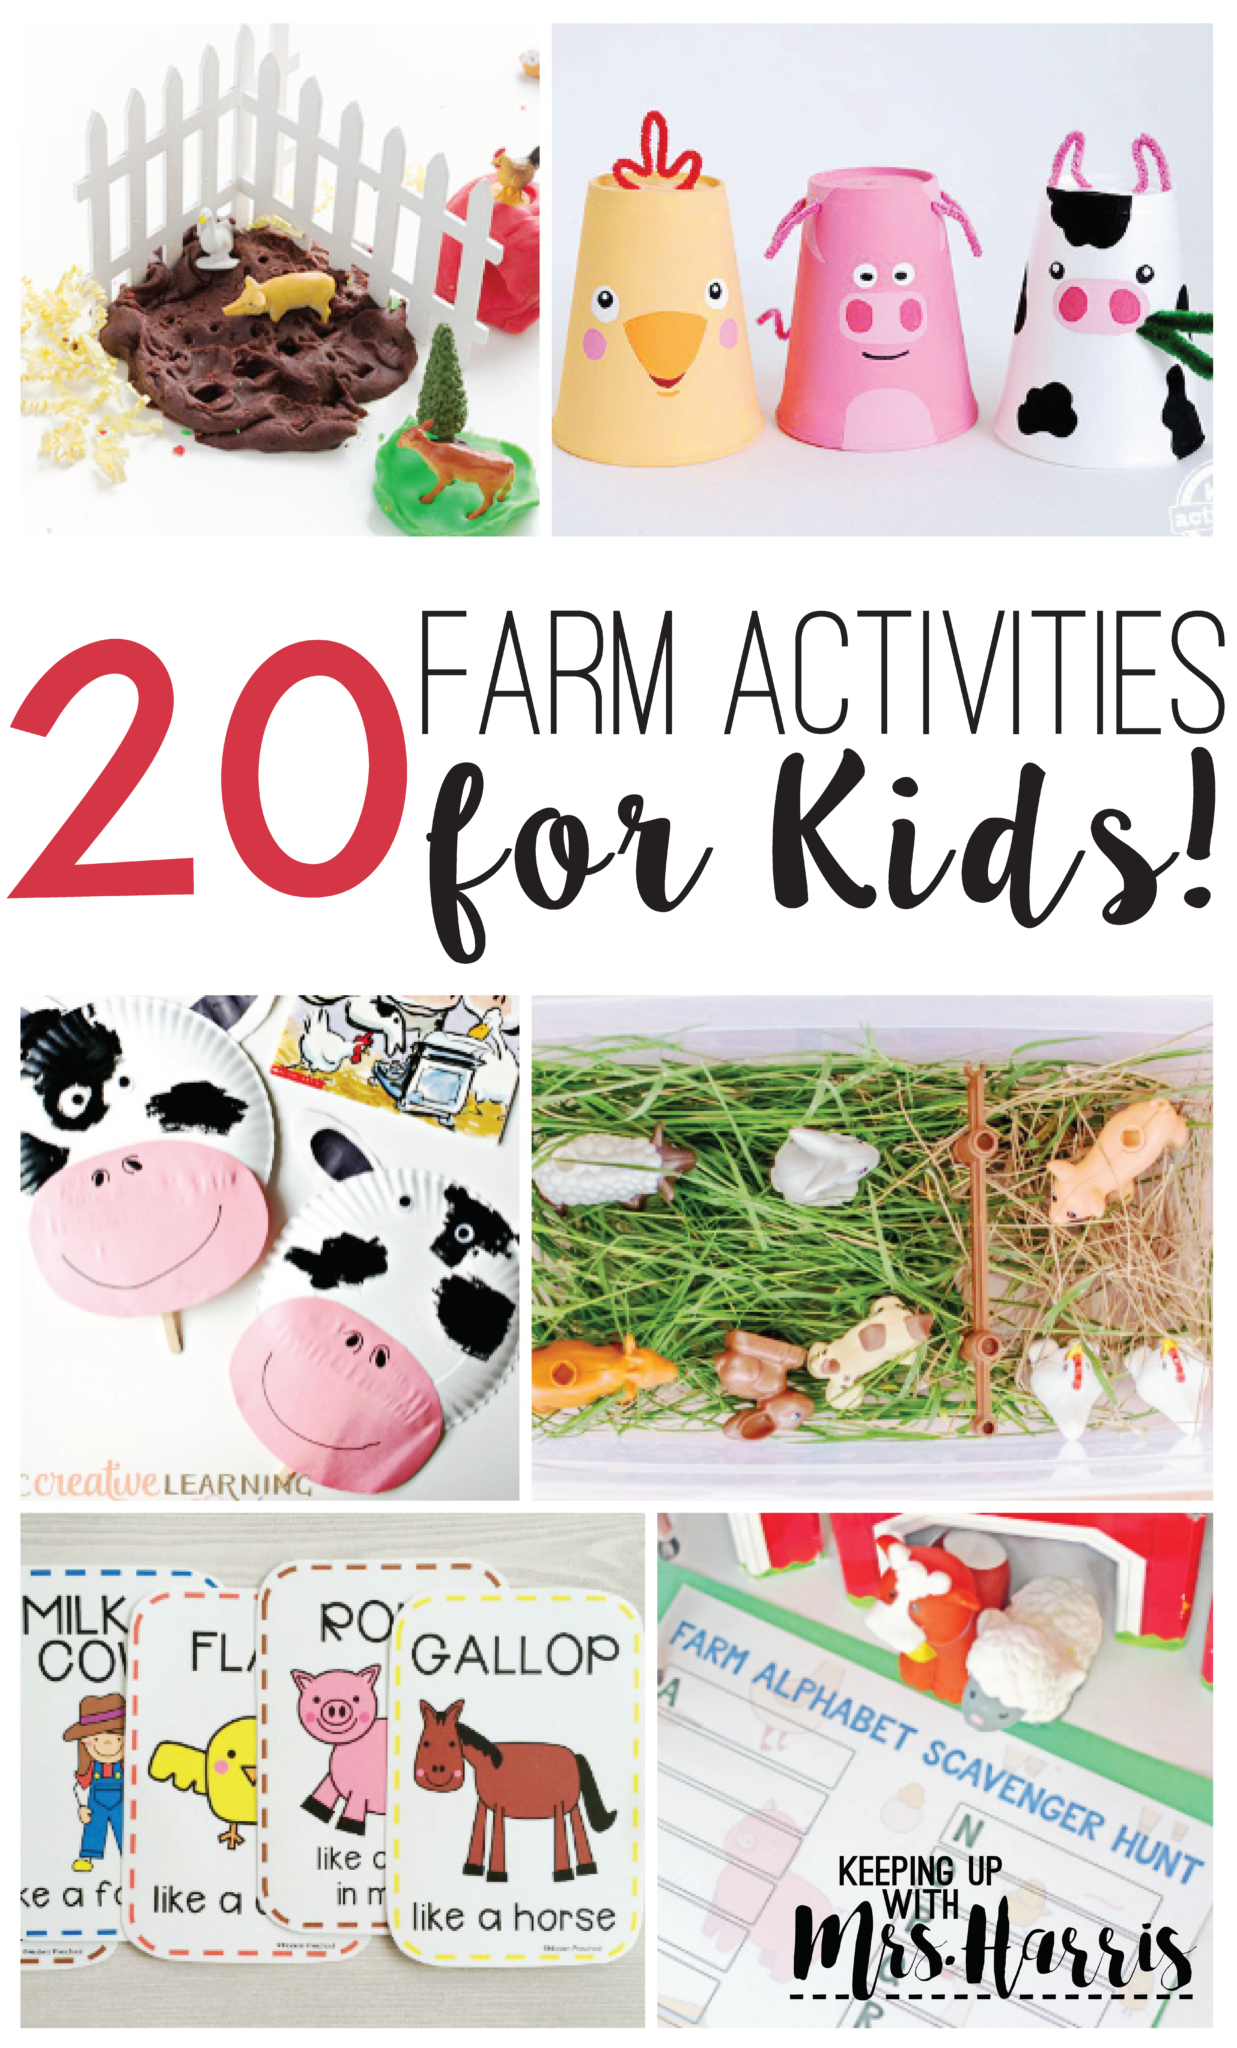 20 Farm Activities for Kids-collection of 20 different farm activities